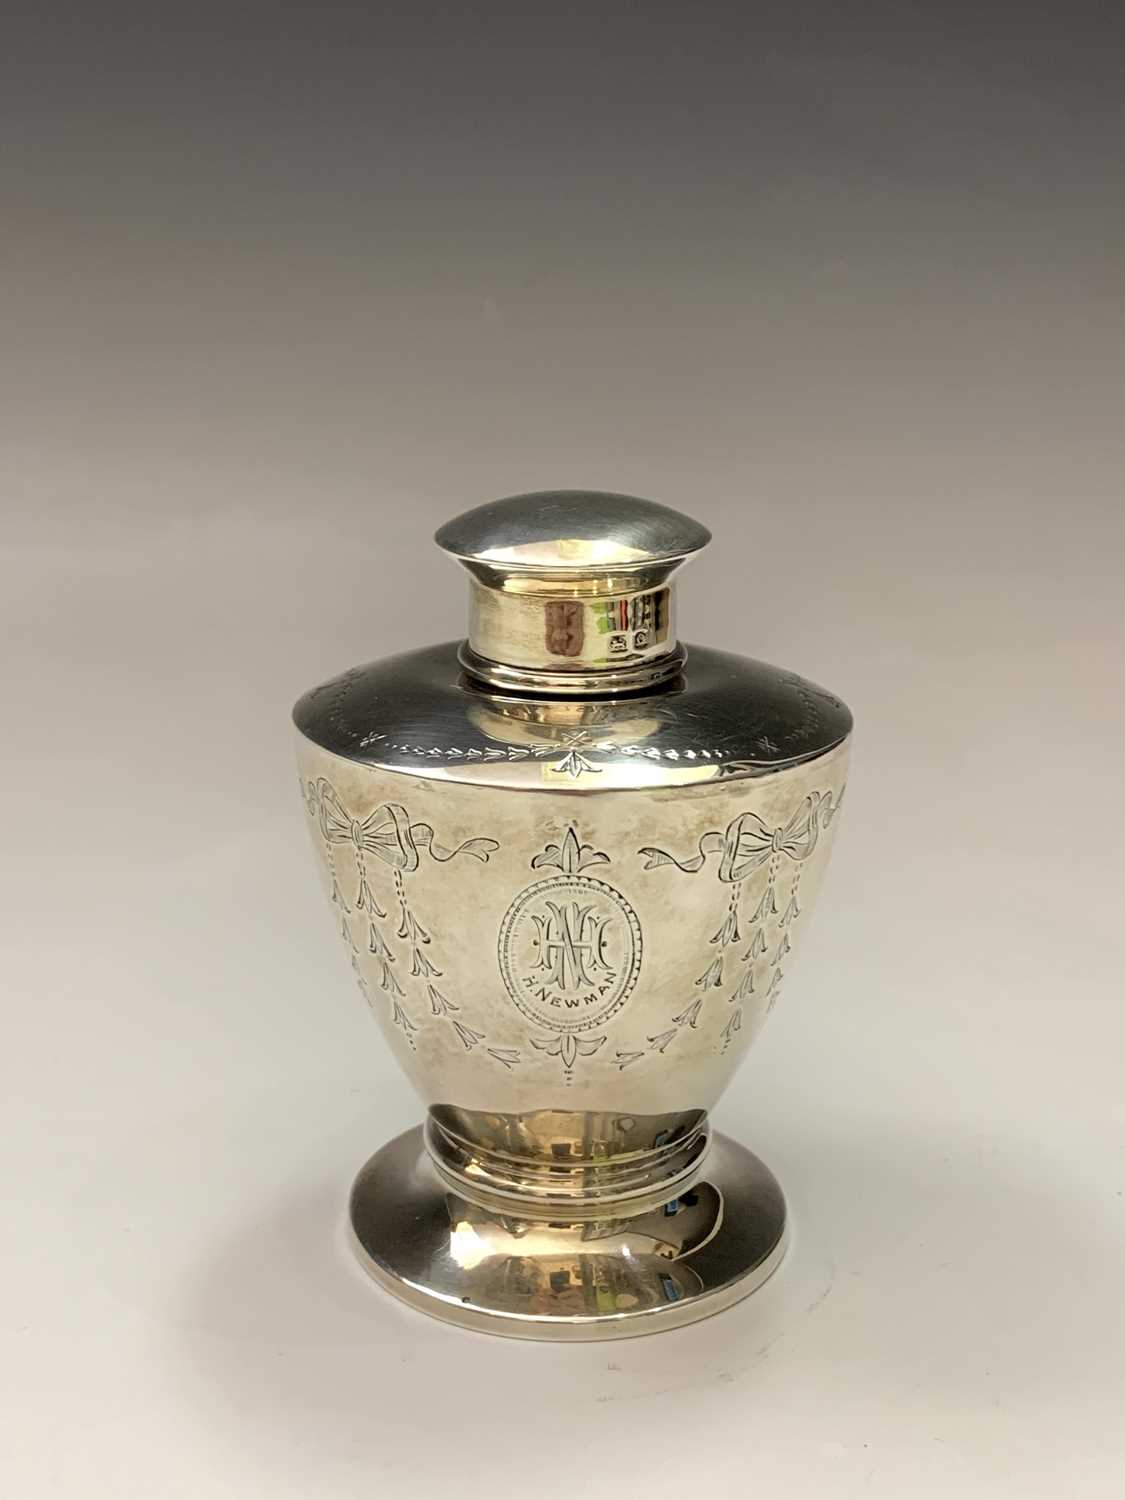 A silver vase shape tea caddy by George Unite with Adam style engraved decoration, London 1913 2.